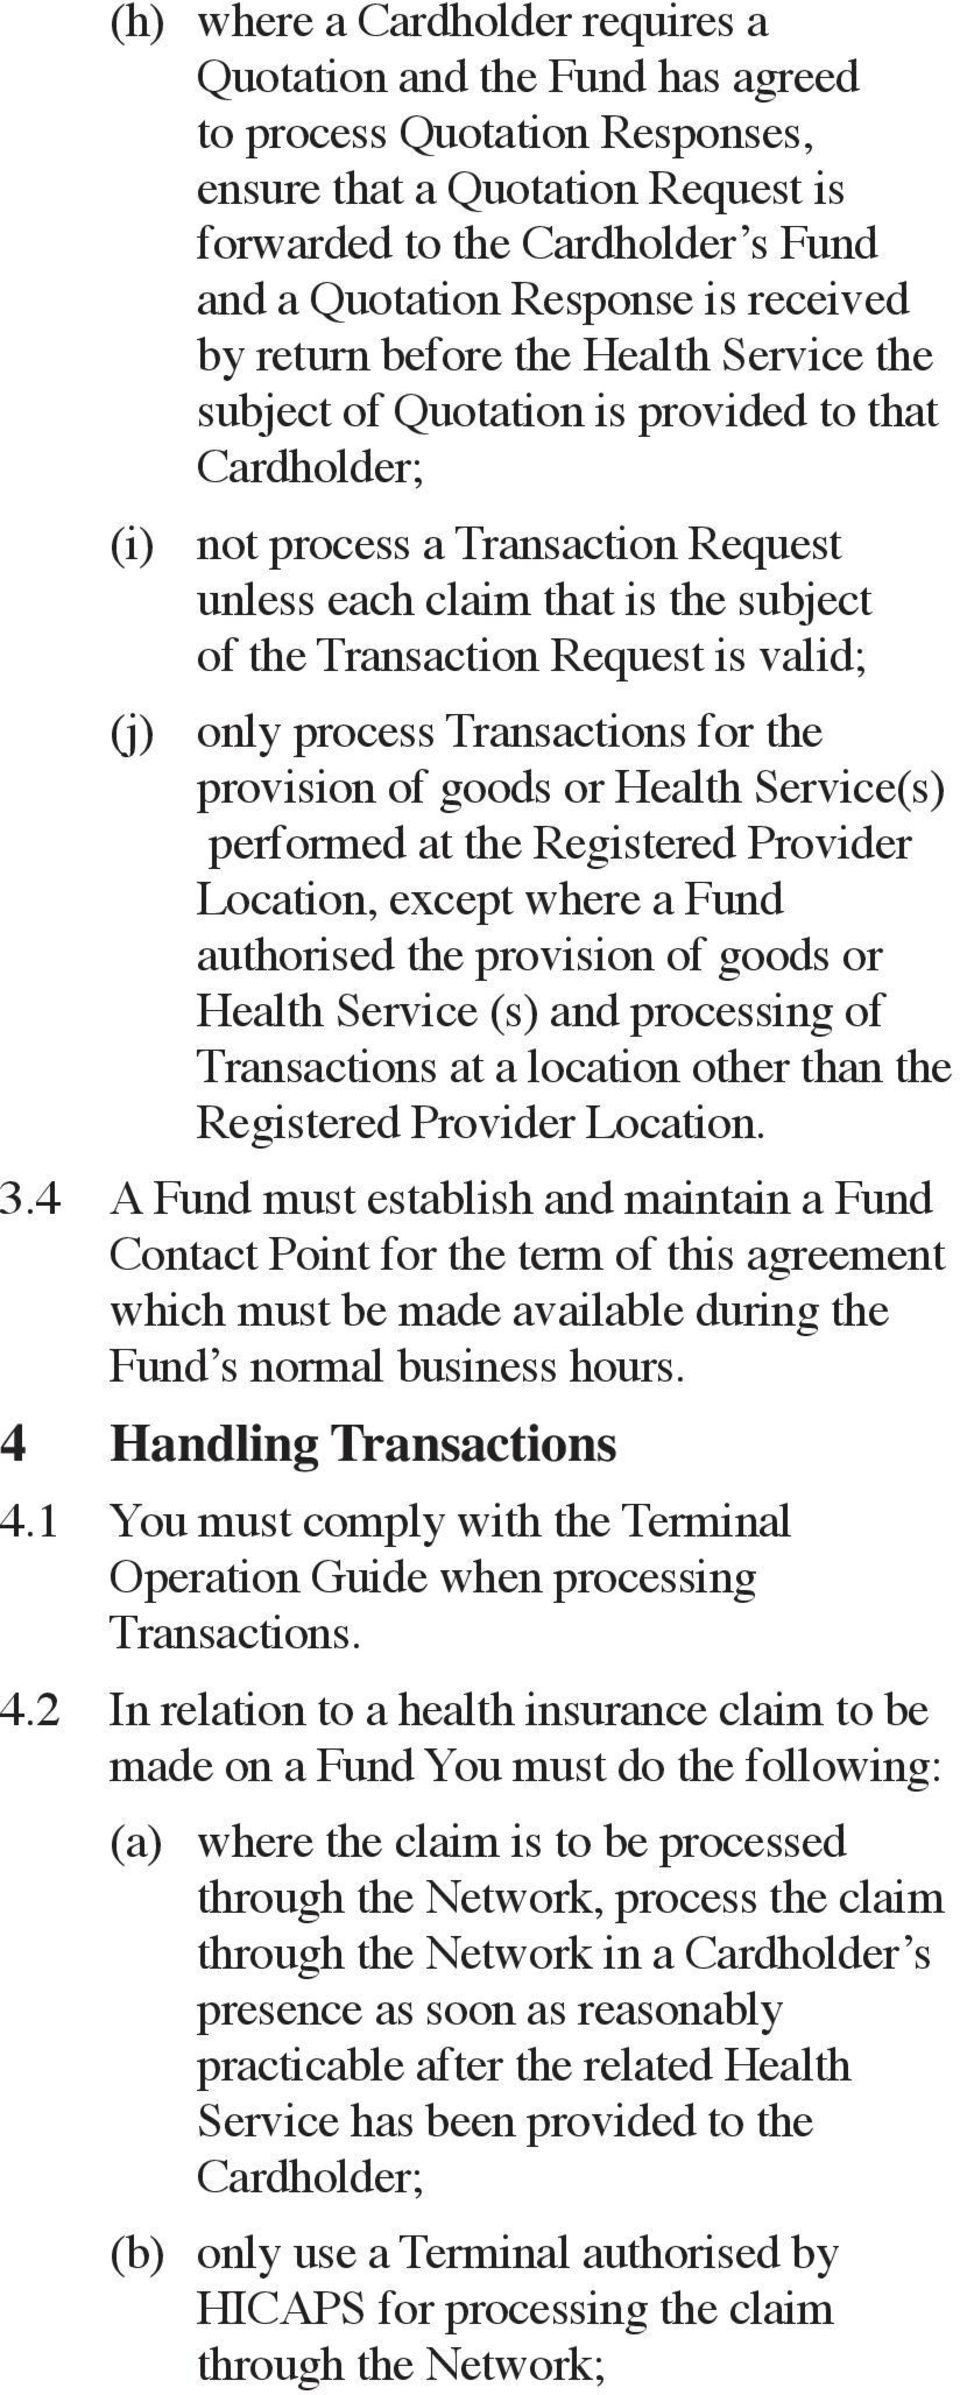 Request is valid; (j) only process Transactions for the provision of goods or Health Service(s) performed at the Registered Provider Location, except where a Fund authorised the provision of goods or